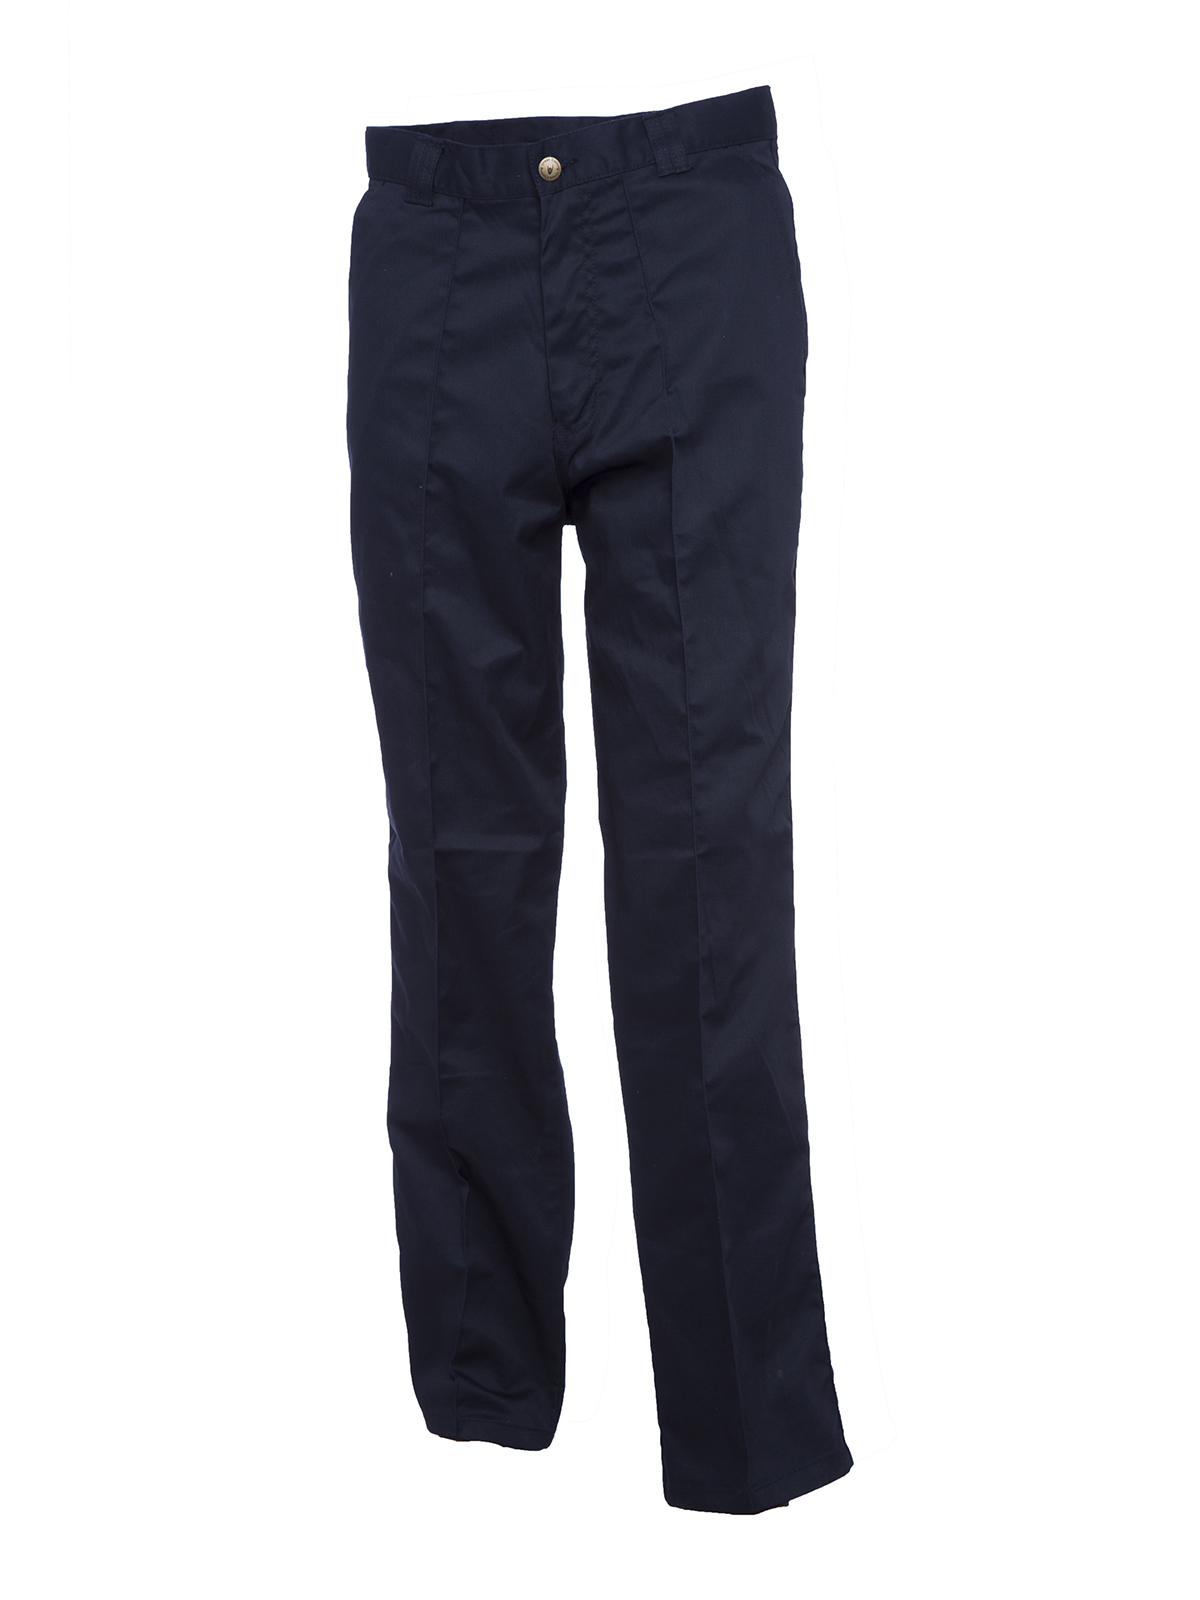 Workwear Trousers, Navy Blue - 34R